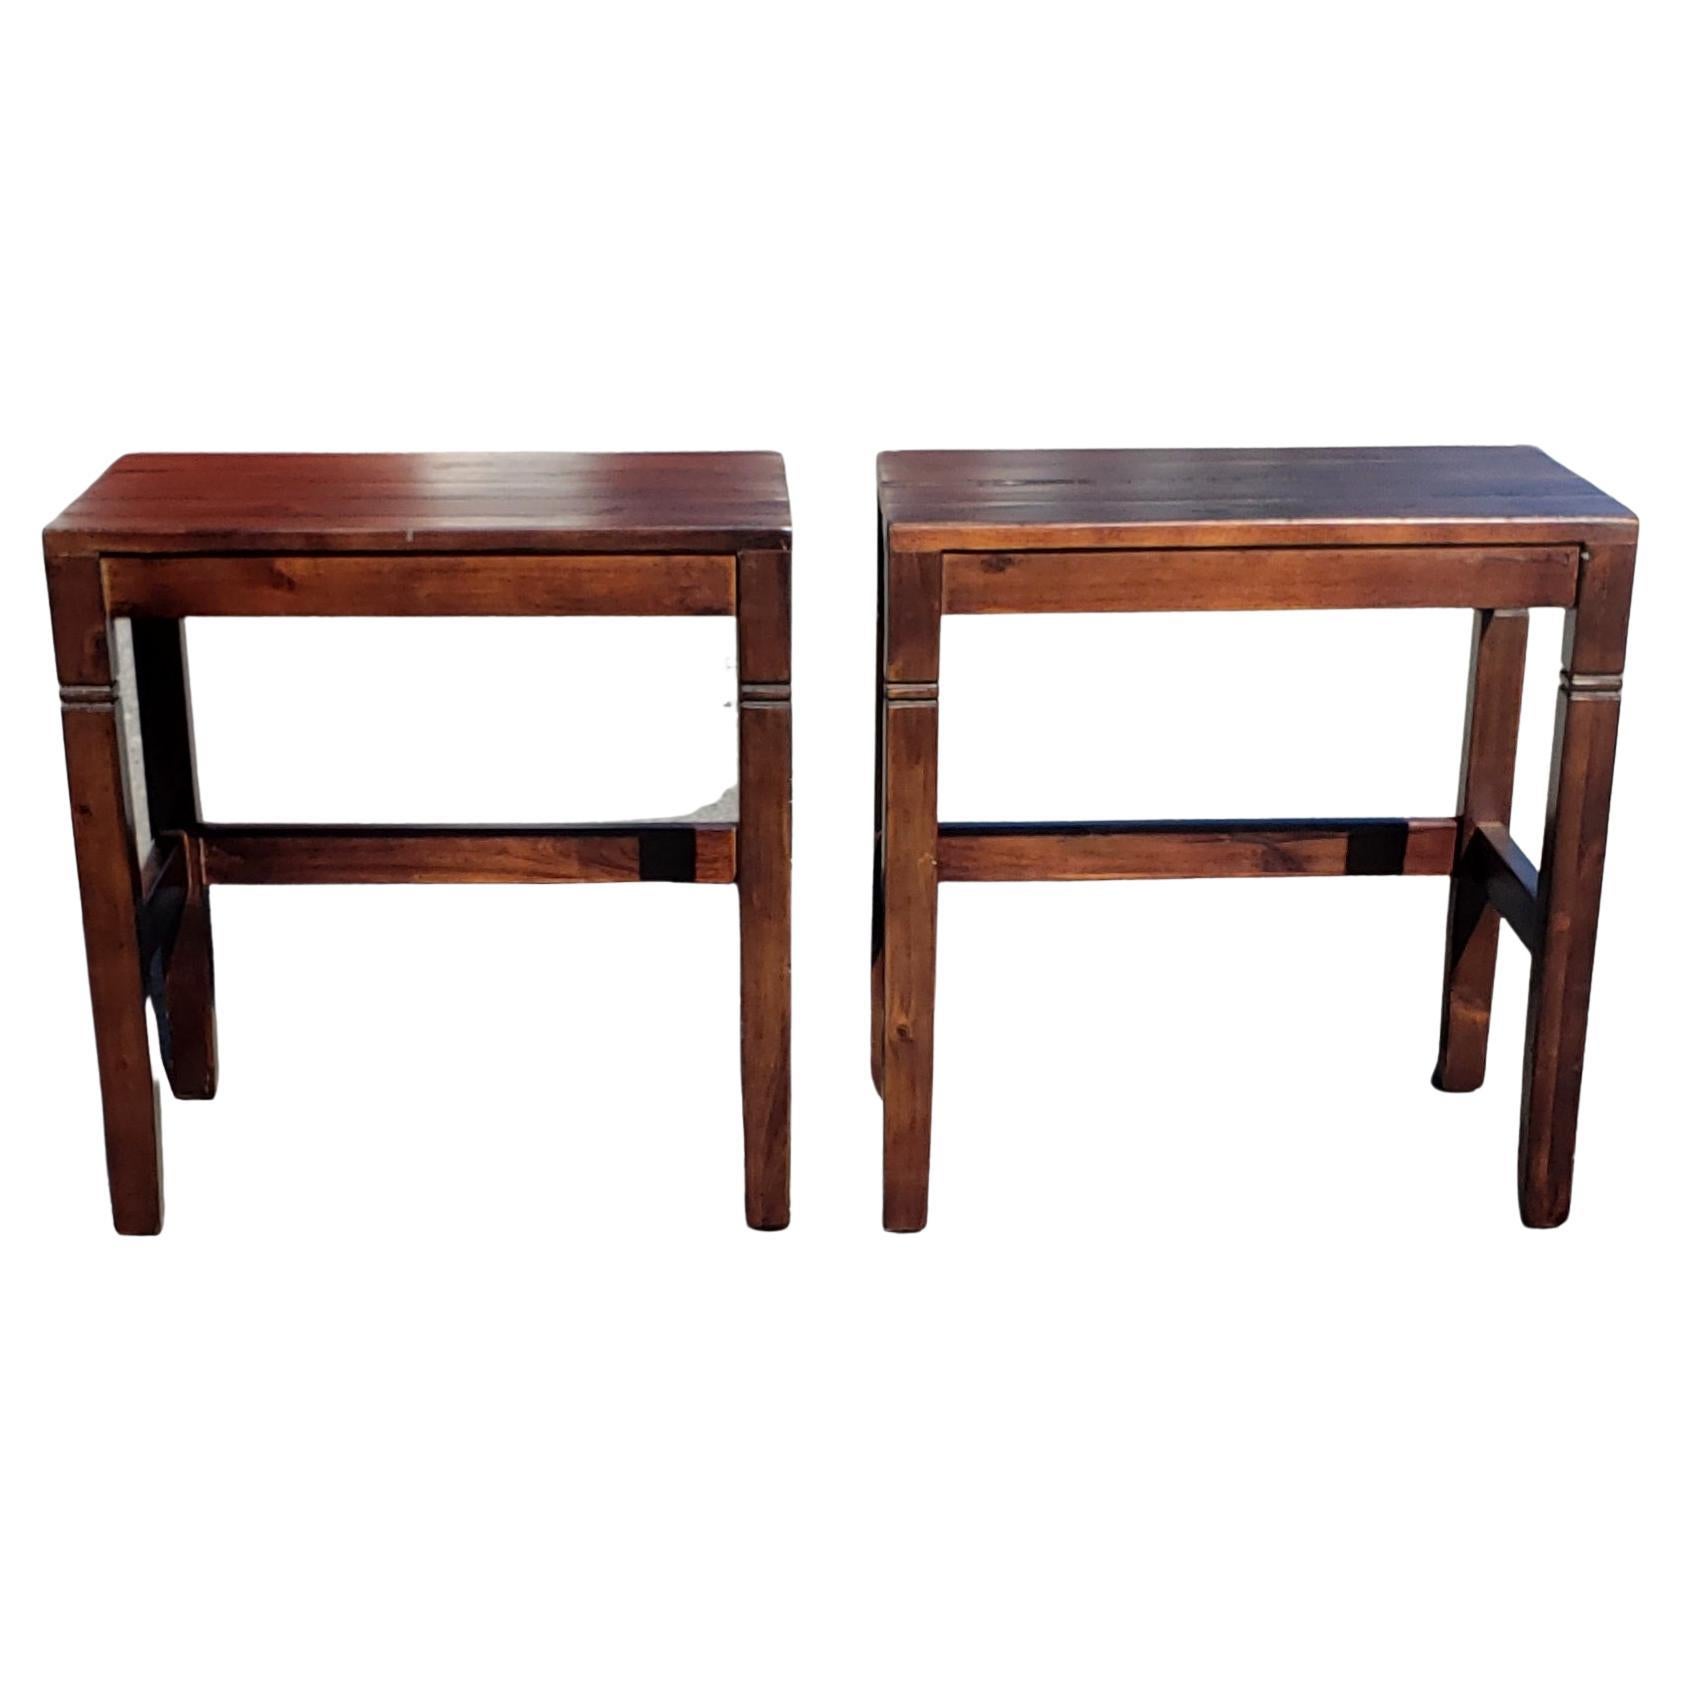 Solid Walnut Rectangular Side Tables, a Pair In Good Condition For Sale In Germantown, MD